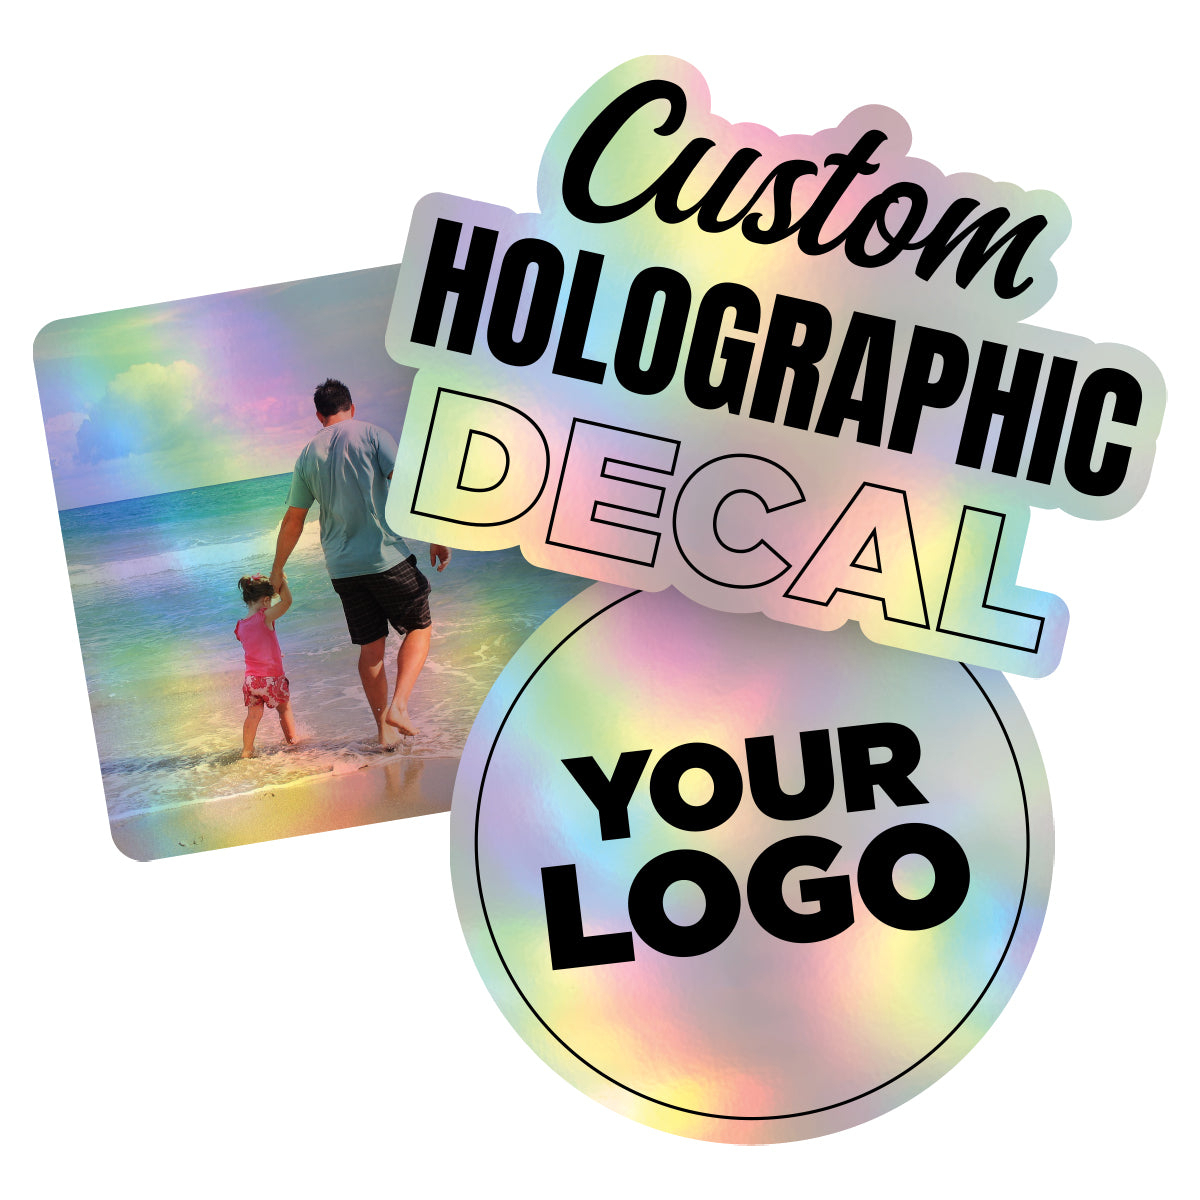 Personalized Holographic Vinyl Sticker Decal Custom Made Any Logo, Image, Text, Or Name Die Cut To Shape - Single, 6 Inch, Circle